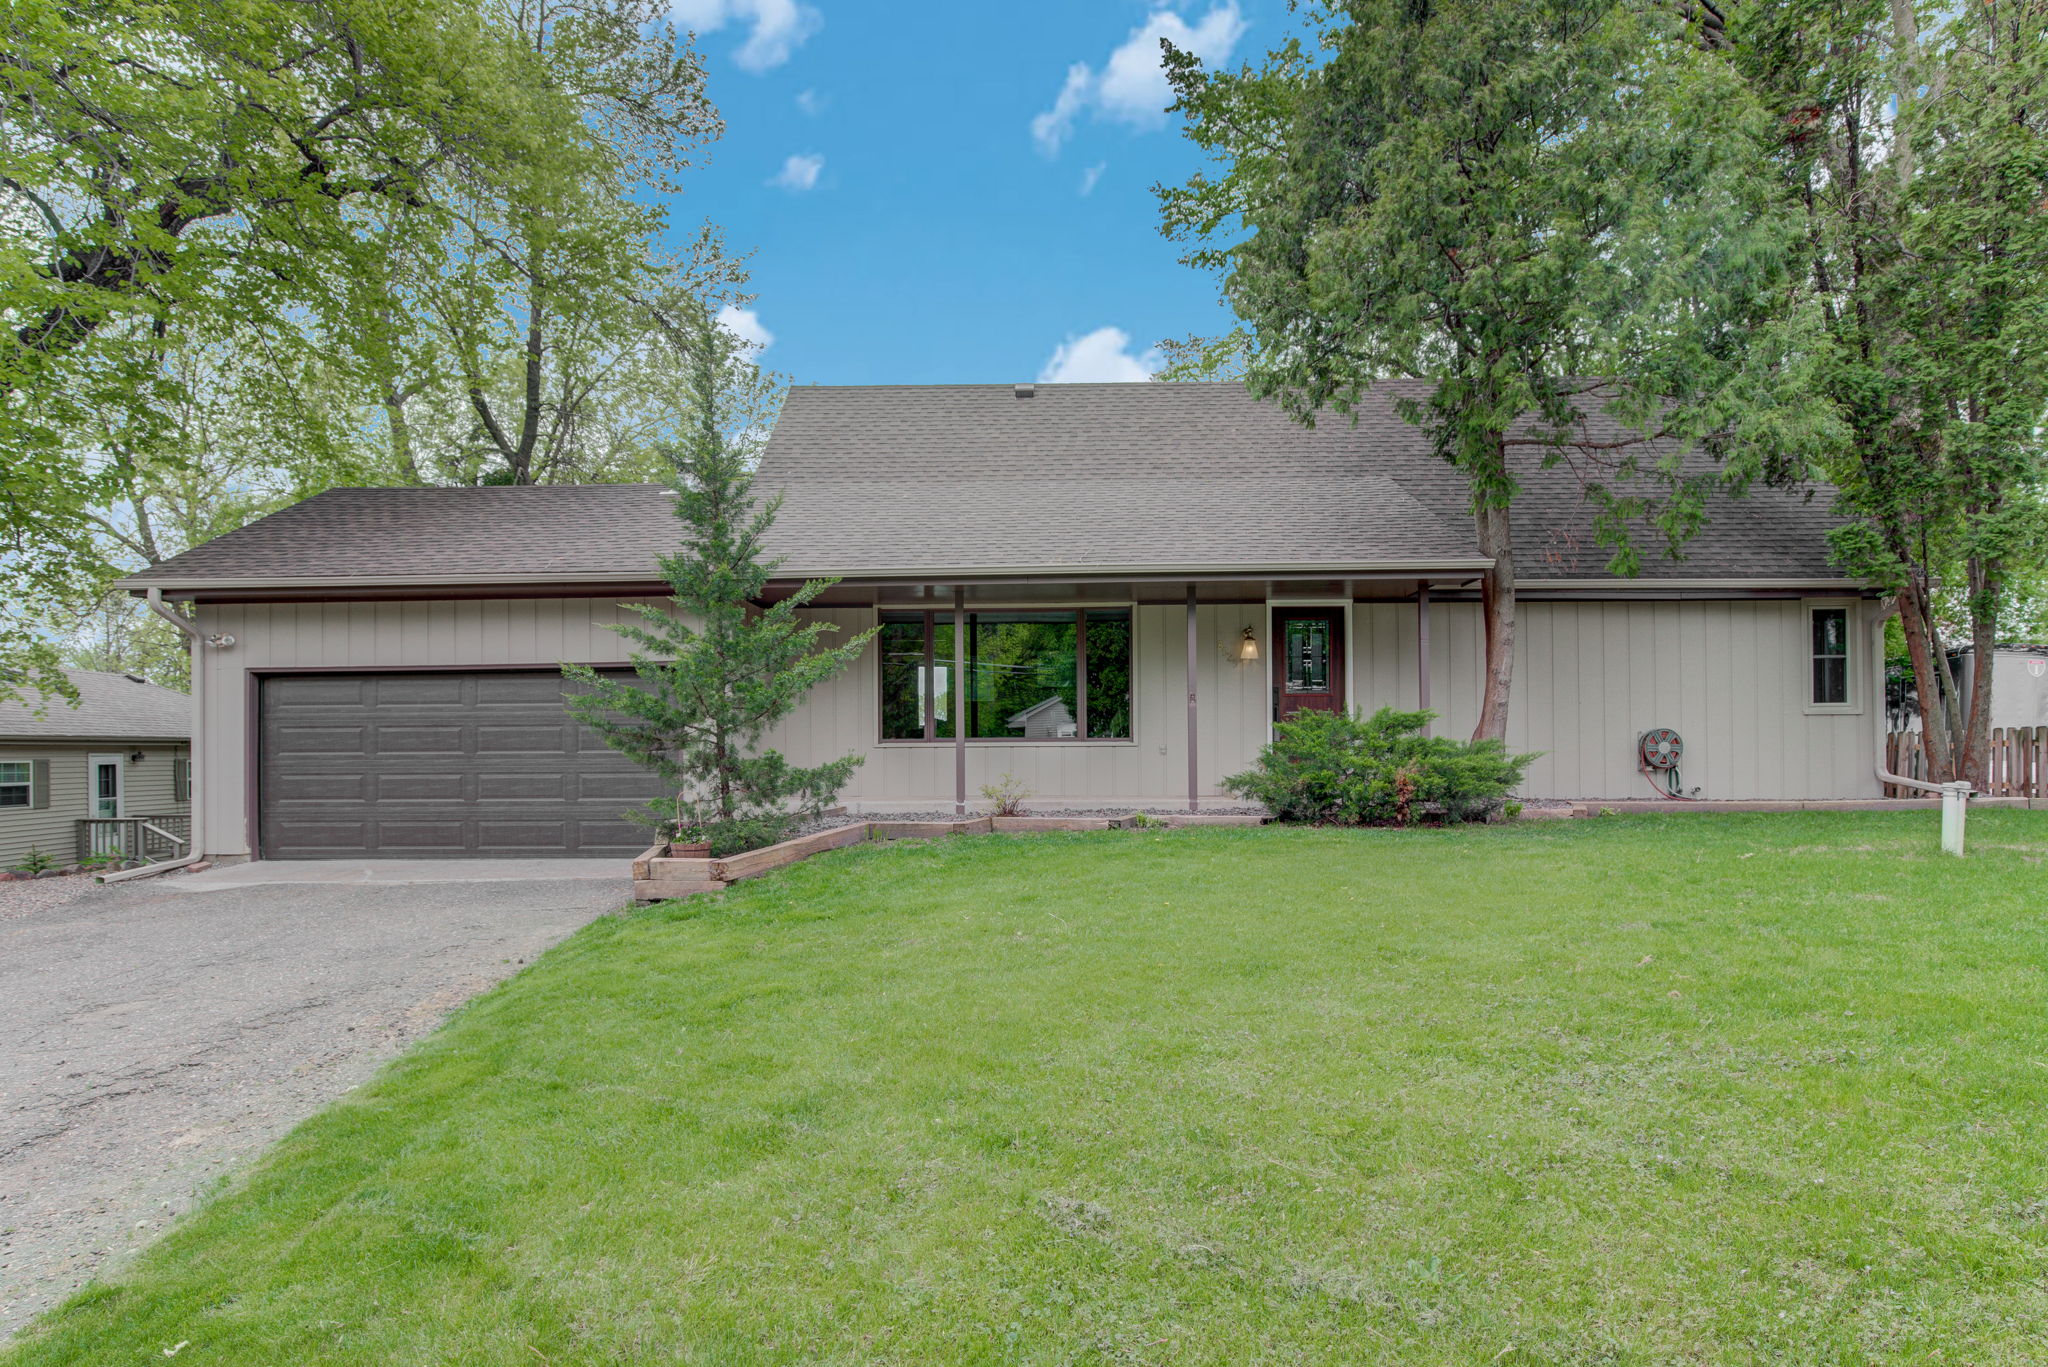  8525 N Shore Trail, Forest Lake, MN 55025, US